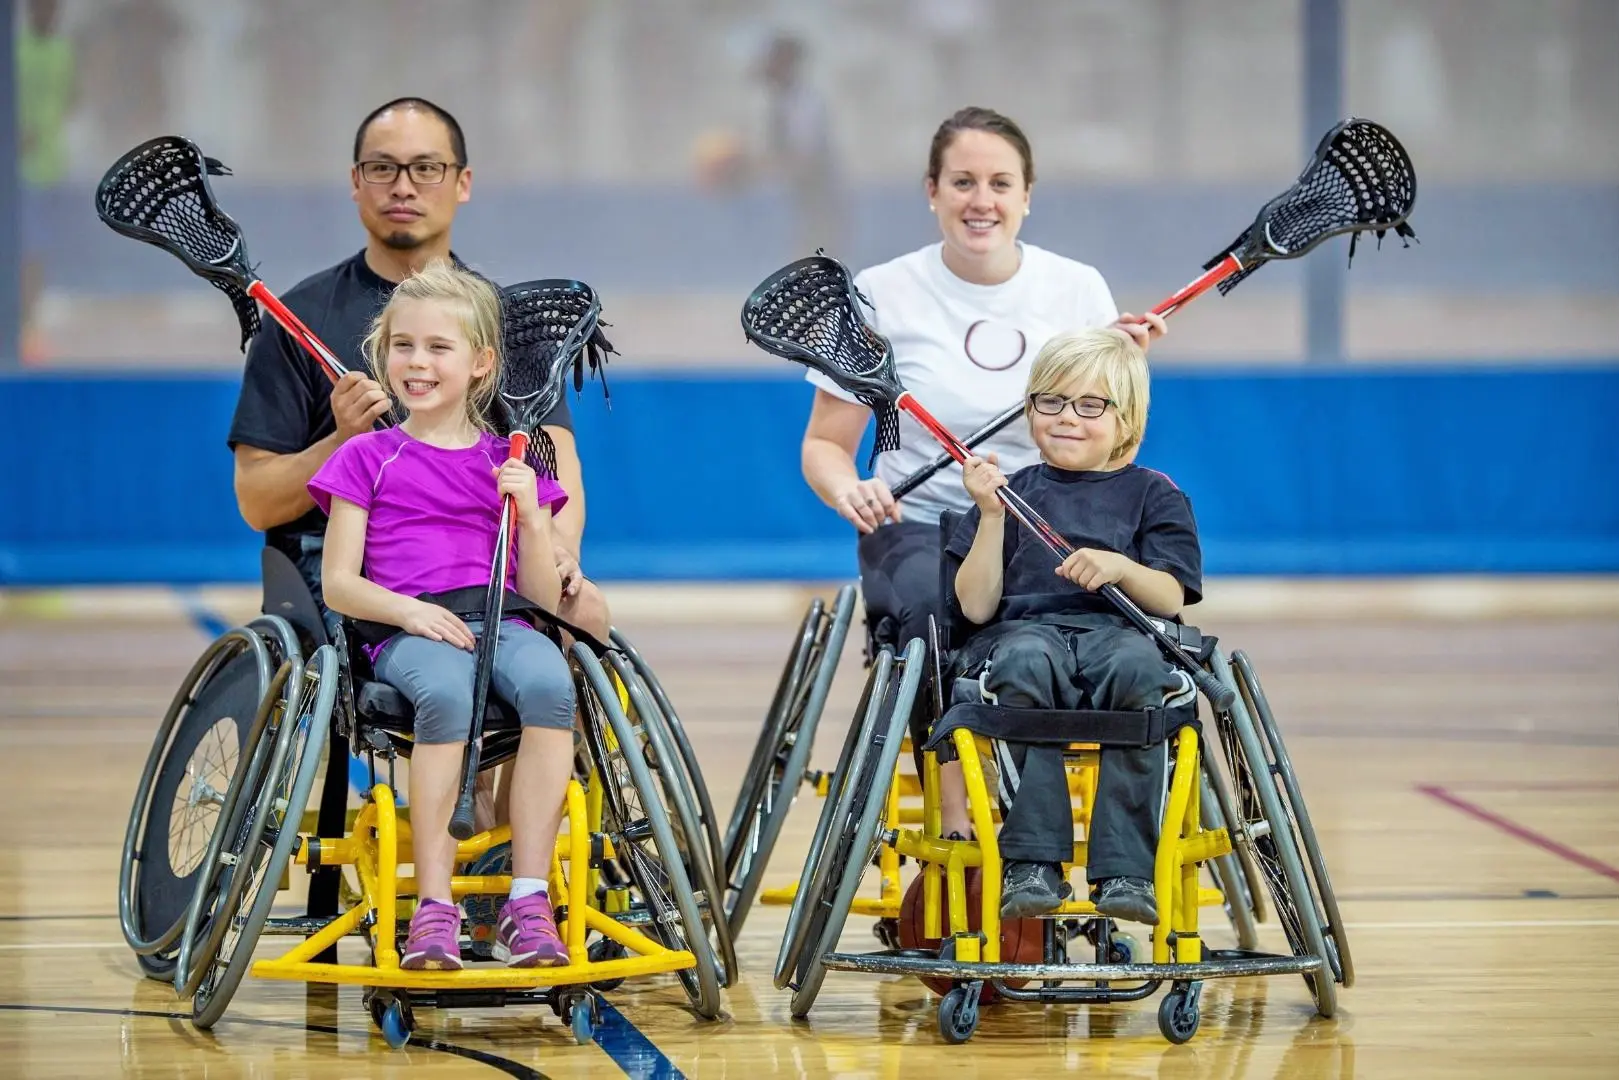 Picture of two younger patients and their parents participating in wheelchair lacrosse, in yellow wheelchairs, holding lacrosse sticks